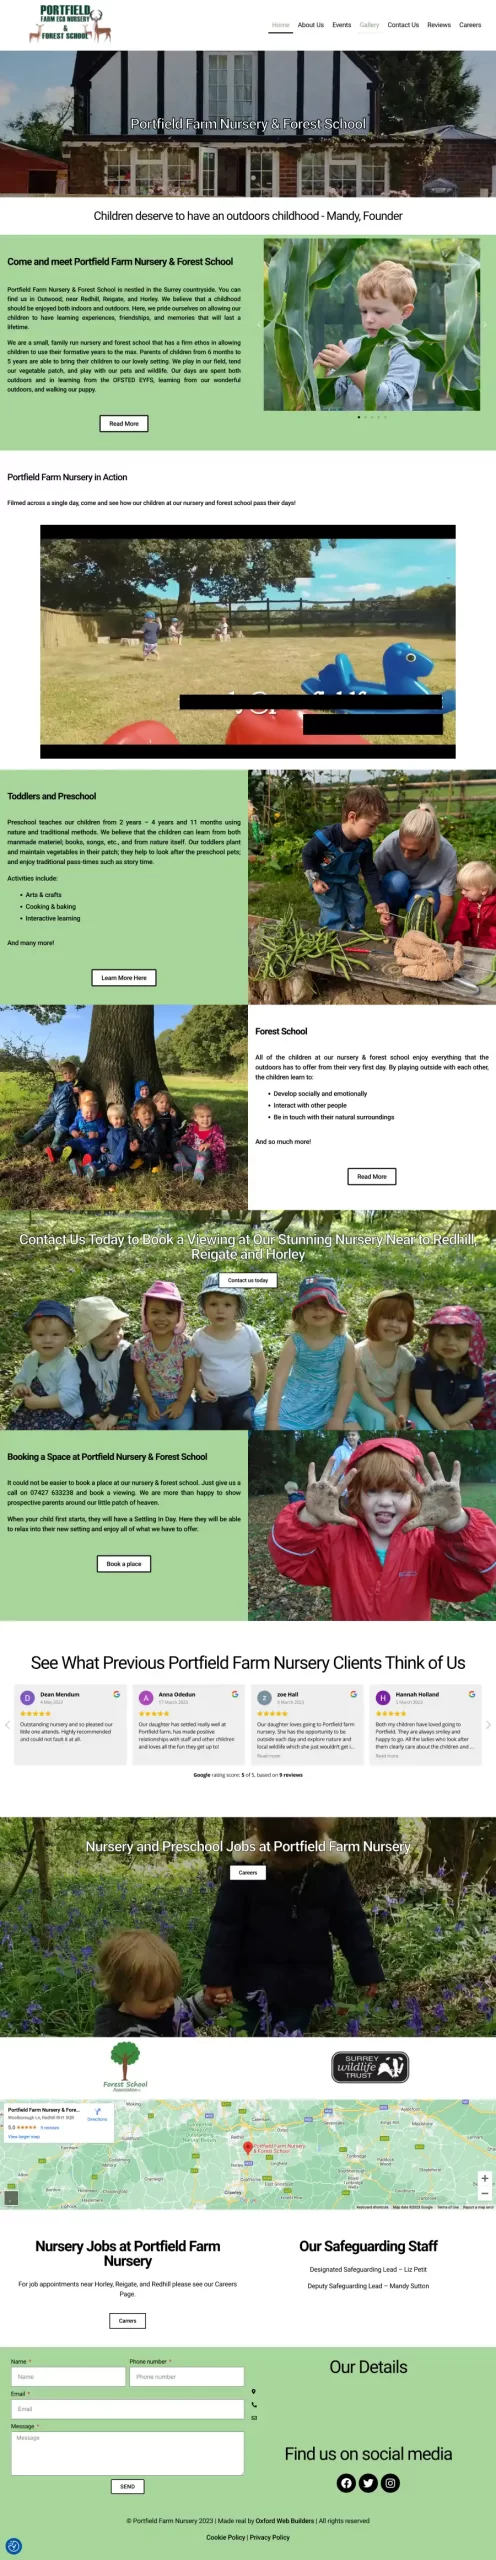 The homepage for the web design for Portfield Farm Nursery. It has green and white sections throughout.